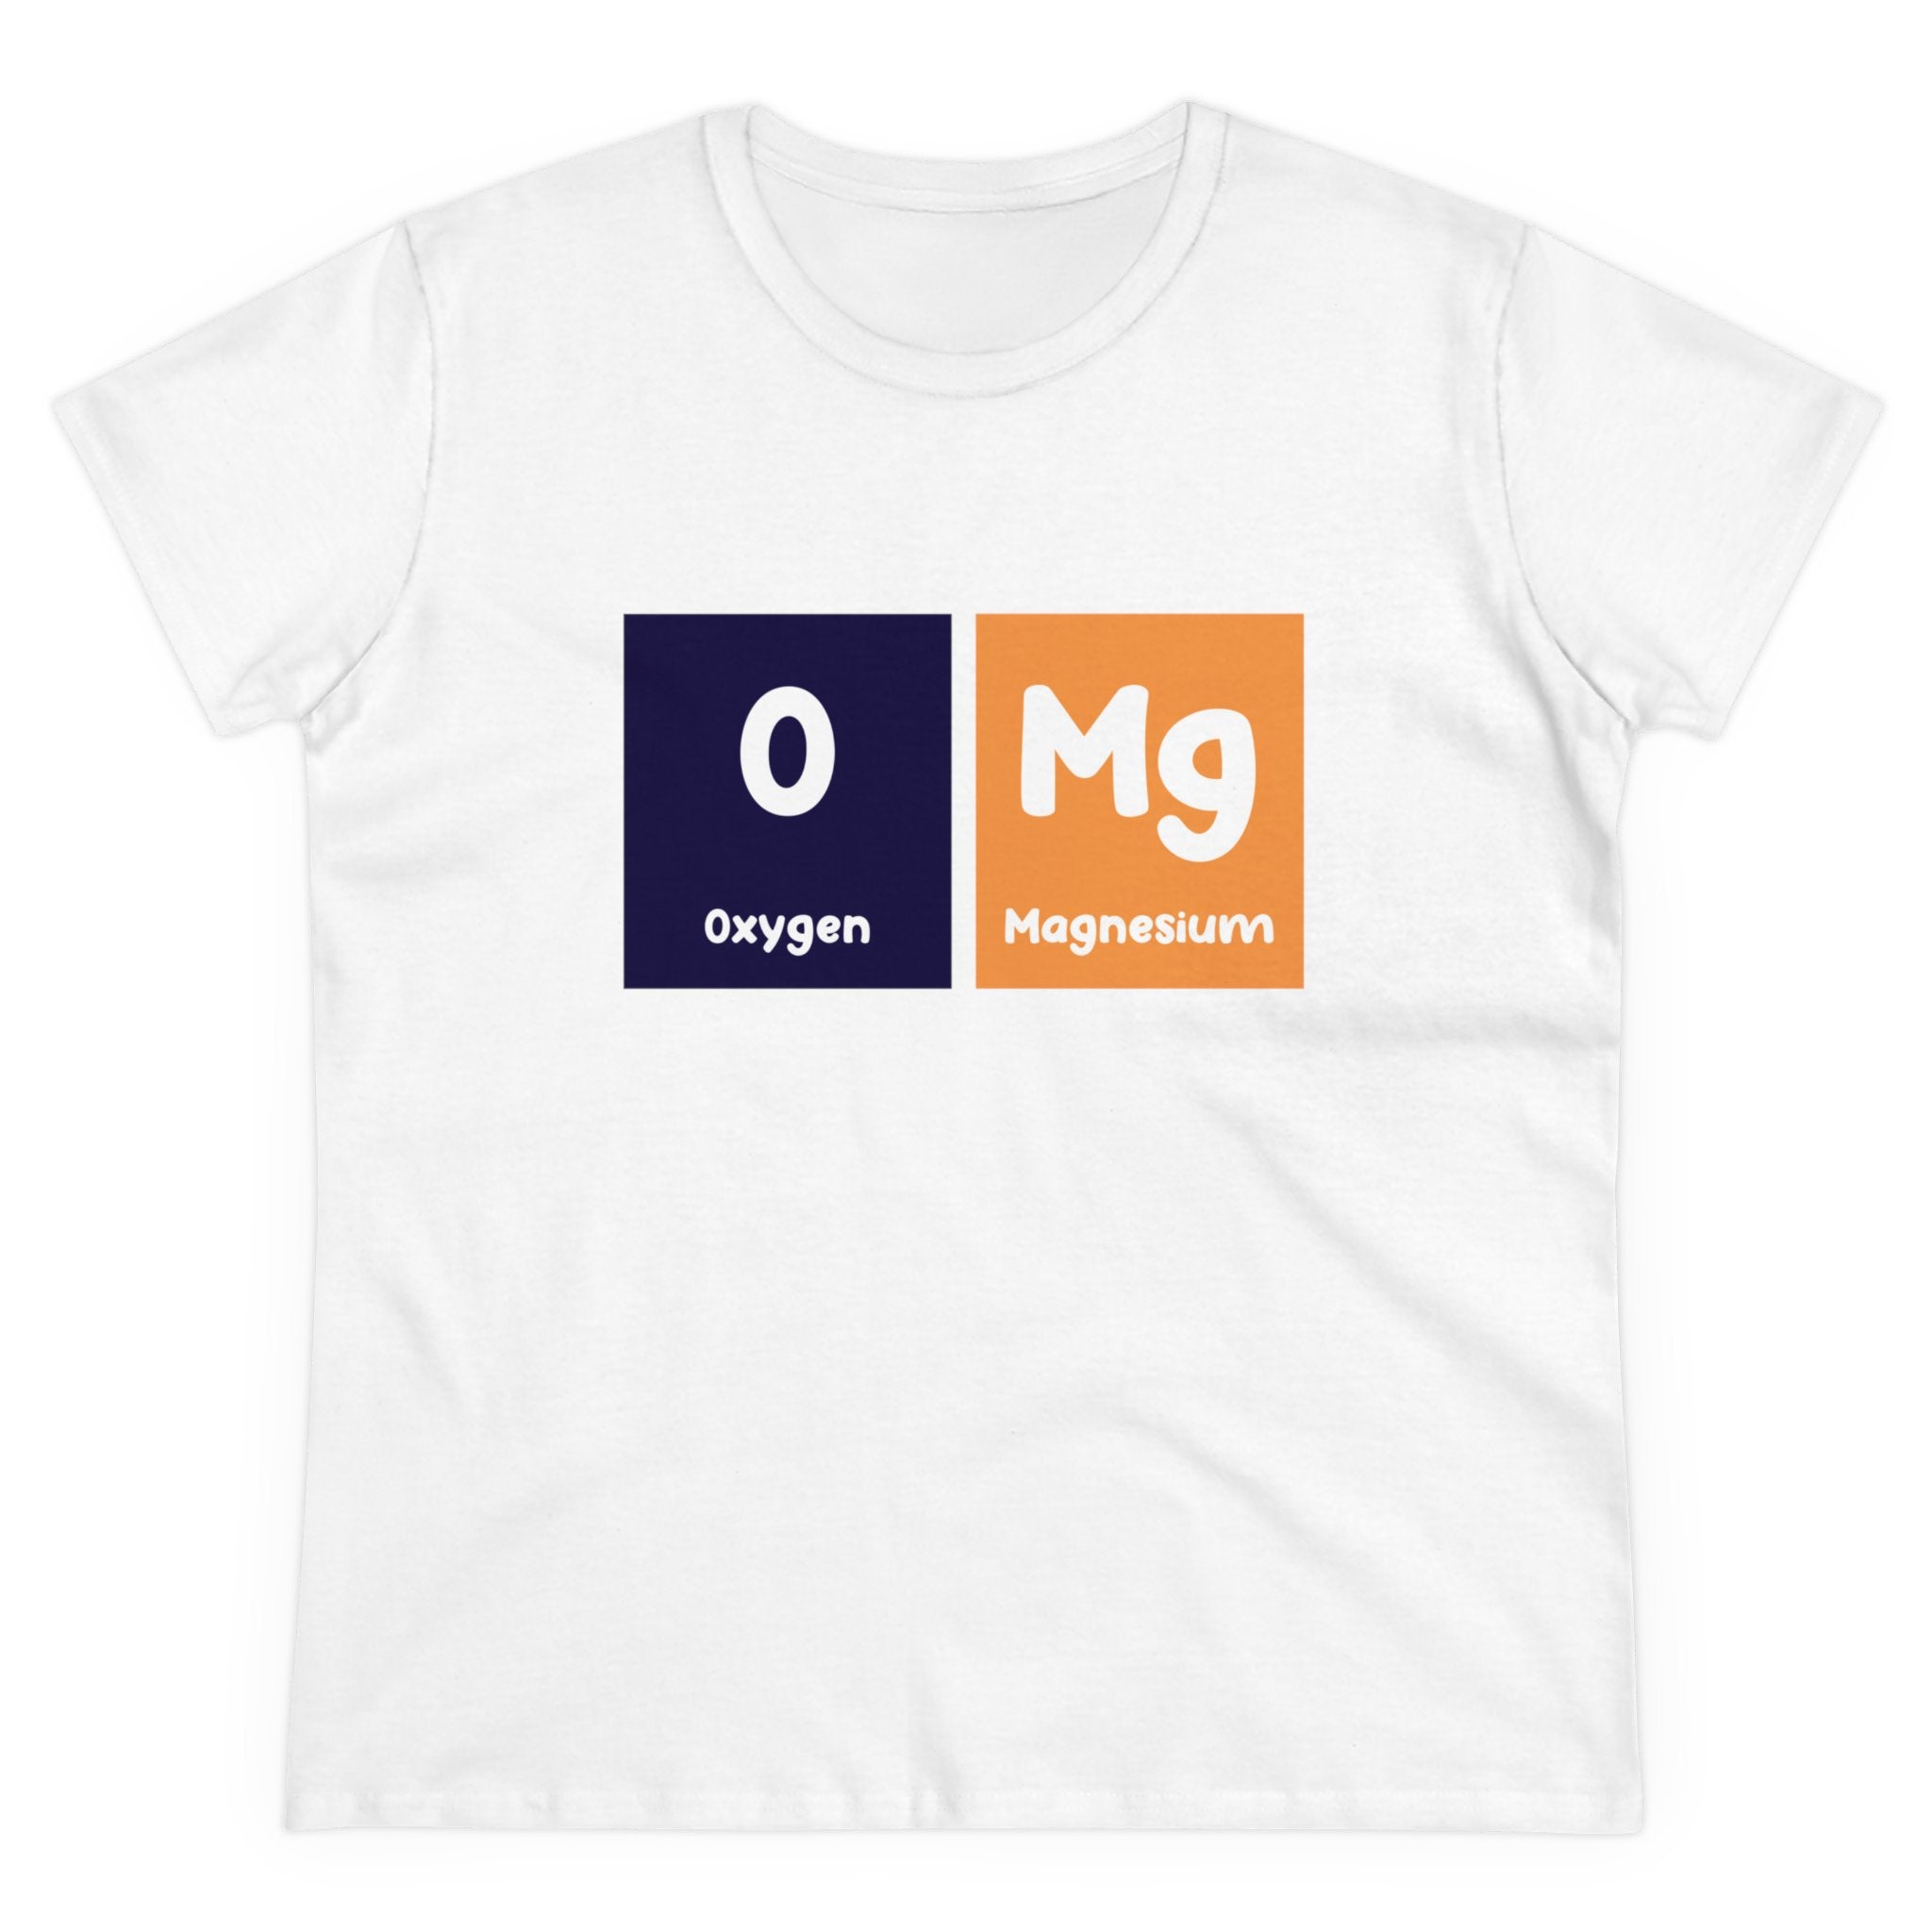 Eco-friendly O-Mg - Women's Tee featuring periodic table elements "O" for Oxygen and "Mg" for Magnesium, crafted from soft cotton.